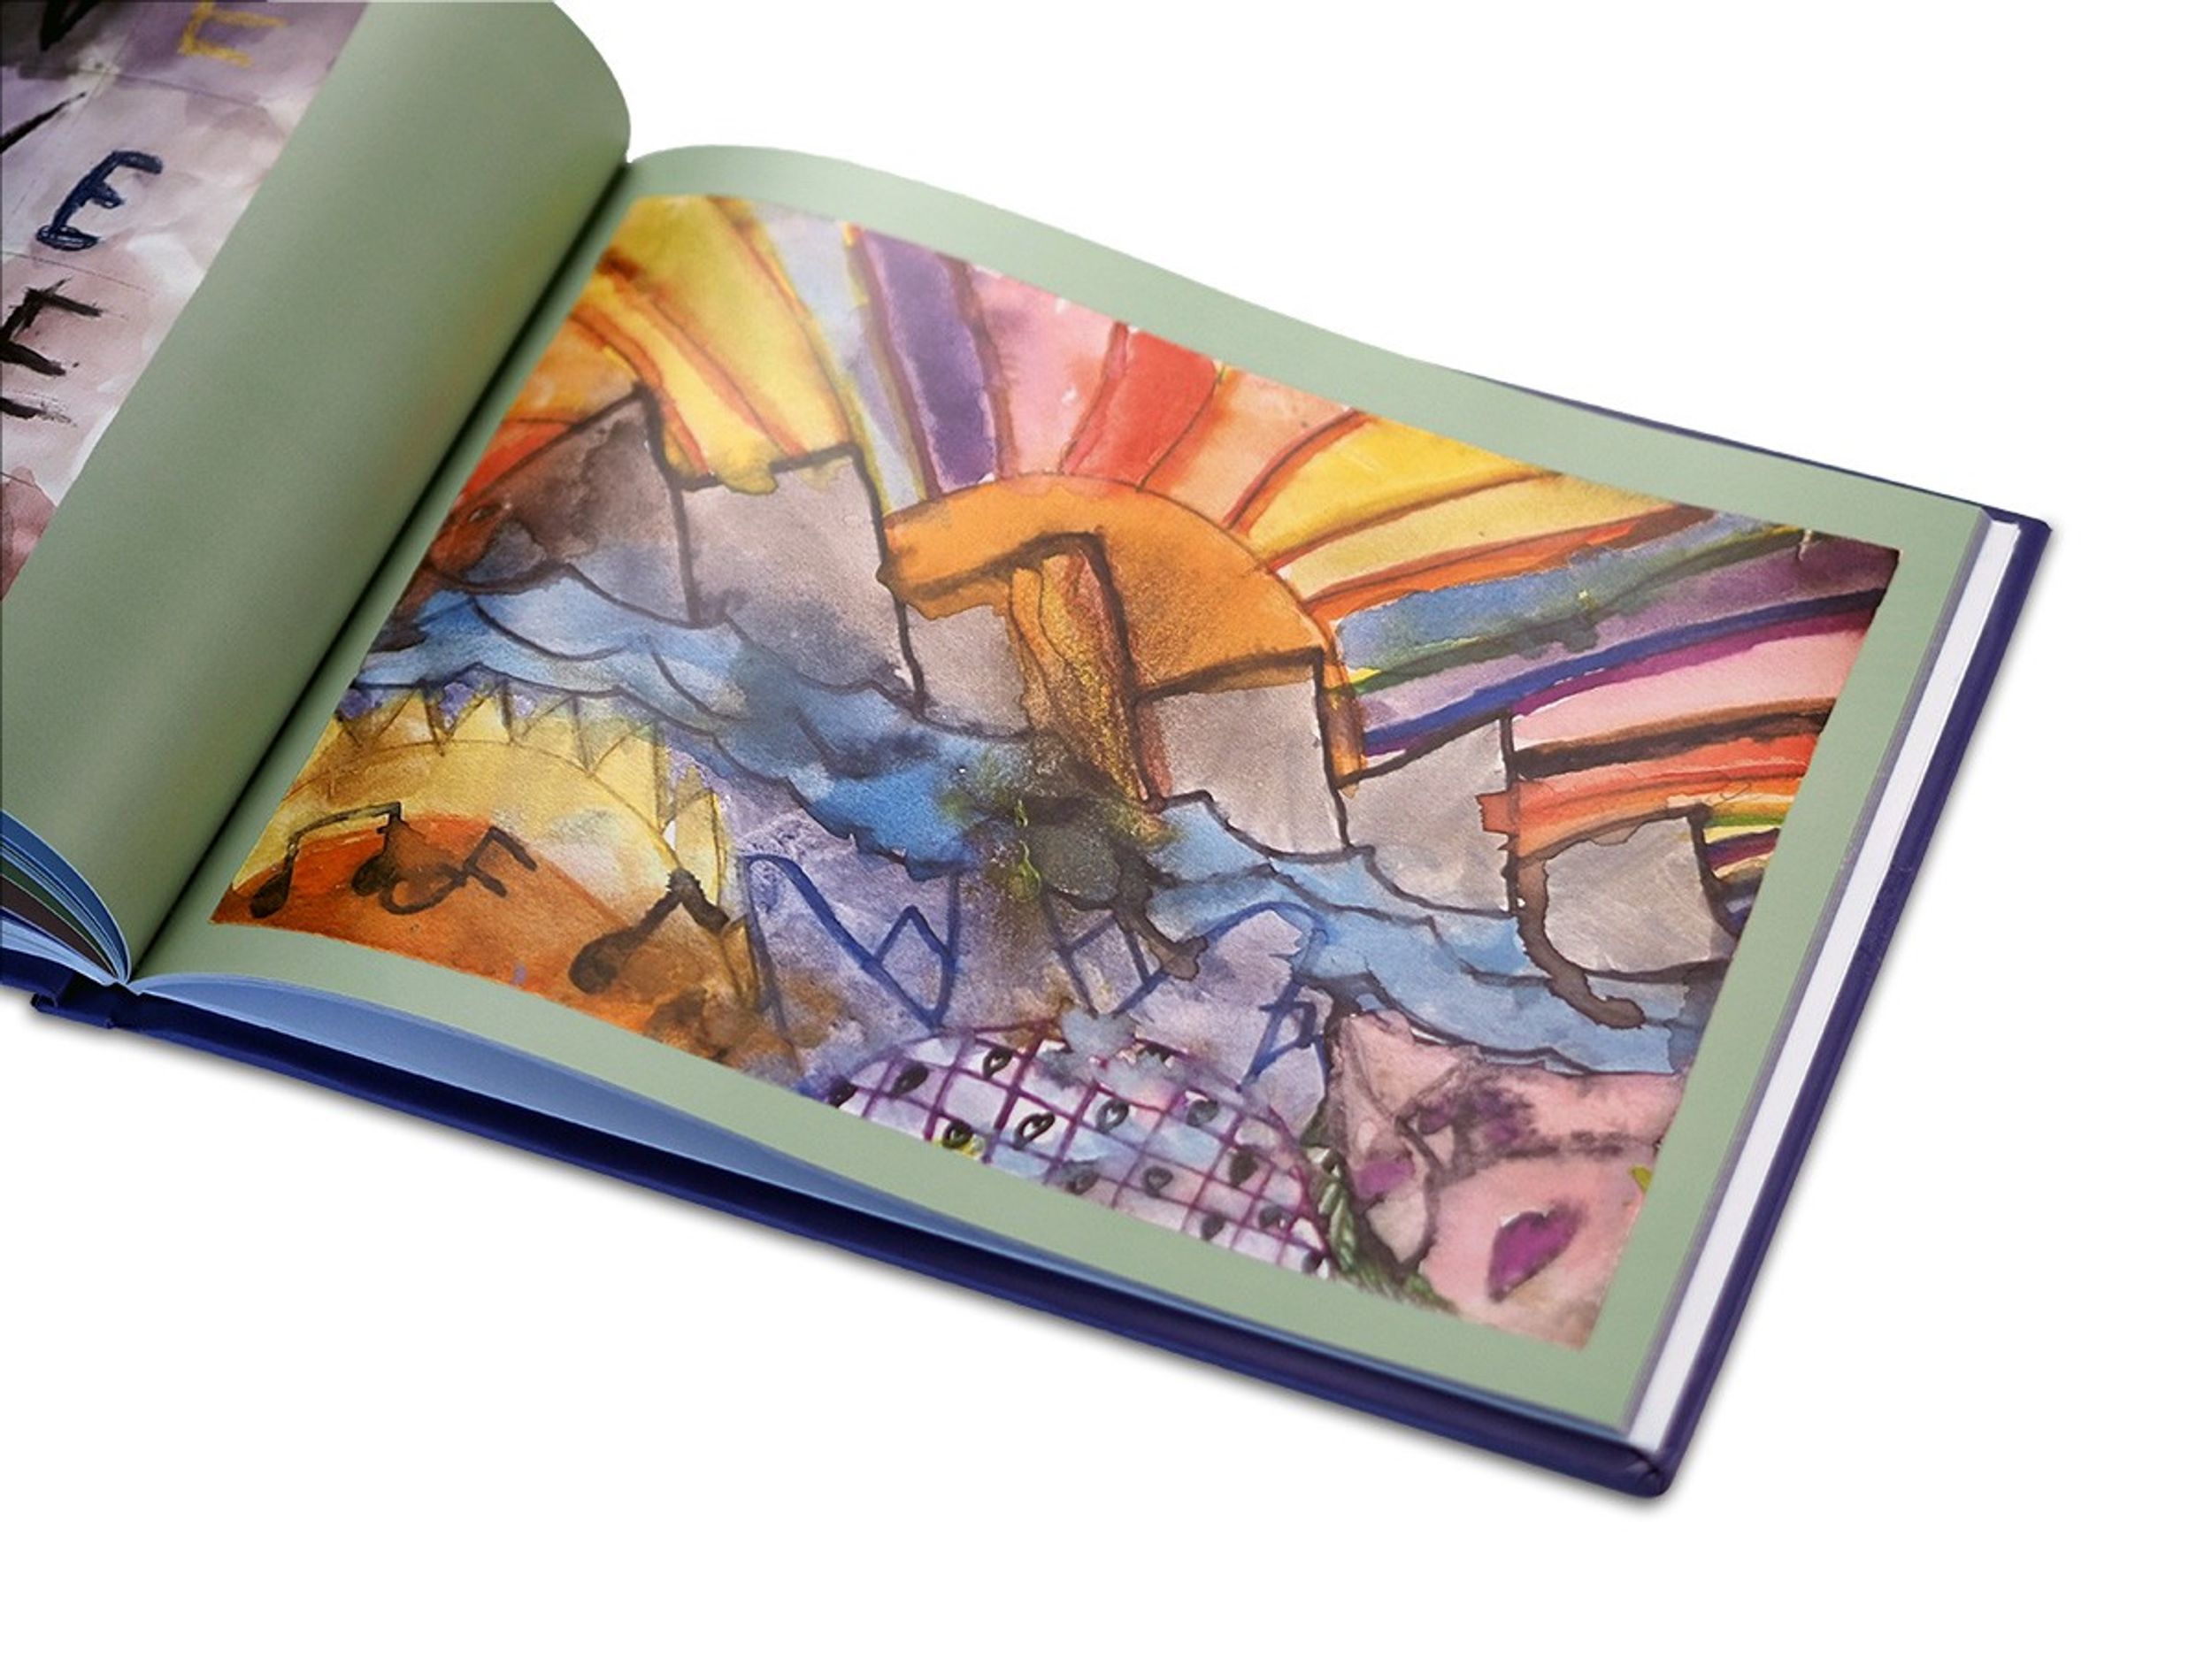 A Scribble book opened and showing how artwork pops on its 100# archival matte paper.